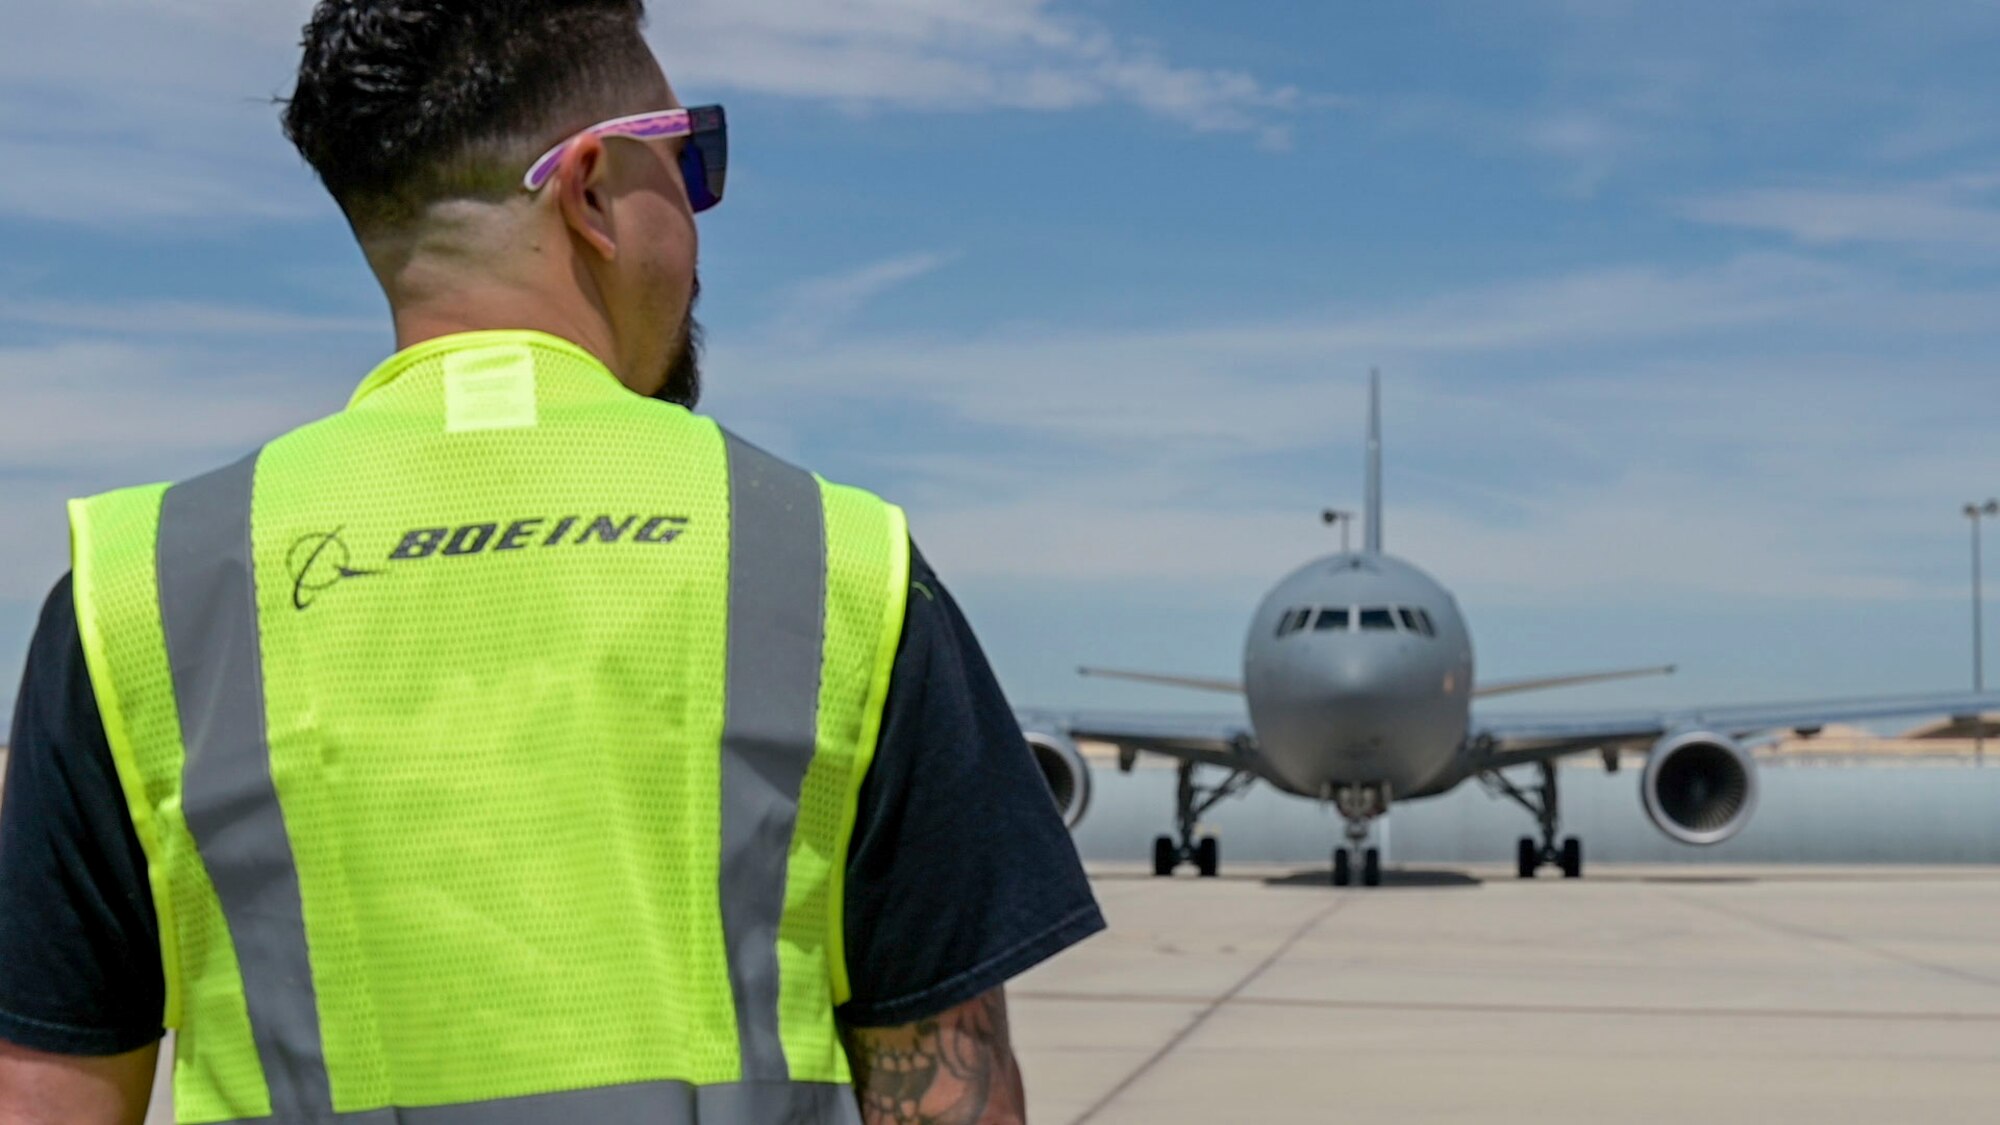 A Boeing maintainer gets ready to guide a KC-46 Pegasus out of of the flight-line to conduct an air refueling test mission at Edwards Air Force Base, Calif. It is a joint effort between Boeing, Air Mobility Command, Air Force Test Center, 418th Flight Test Squadron and Air Force Life Cycle Management Center to successfully complete the mission.